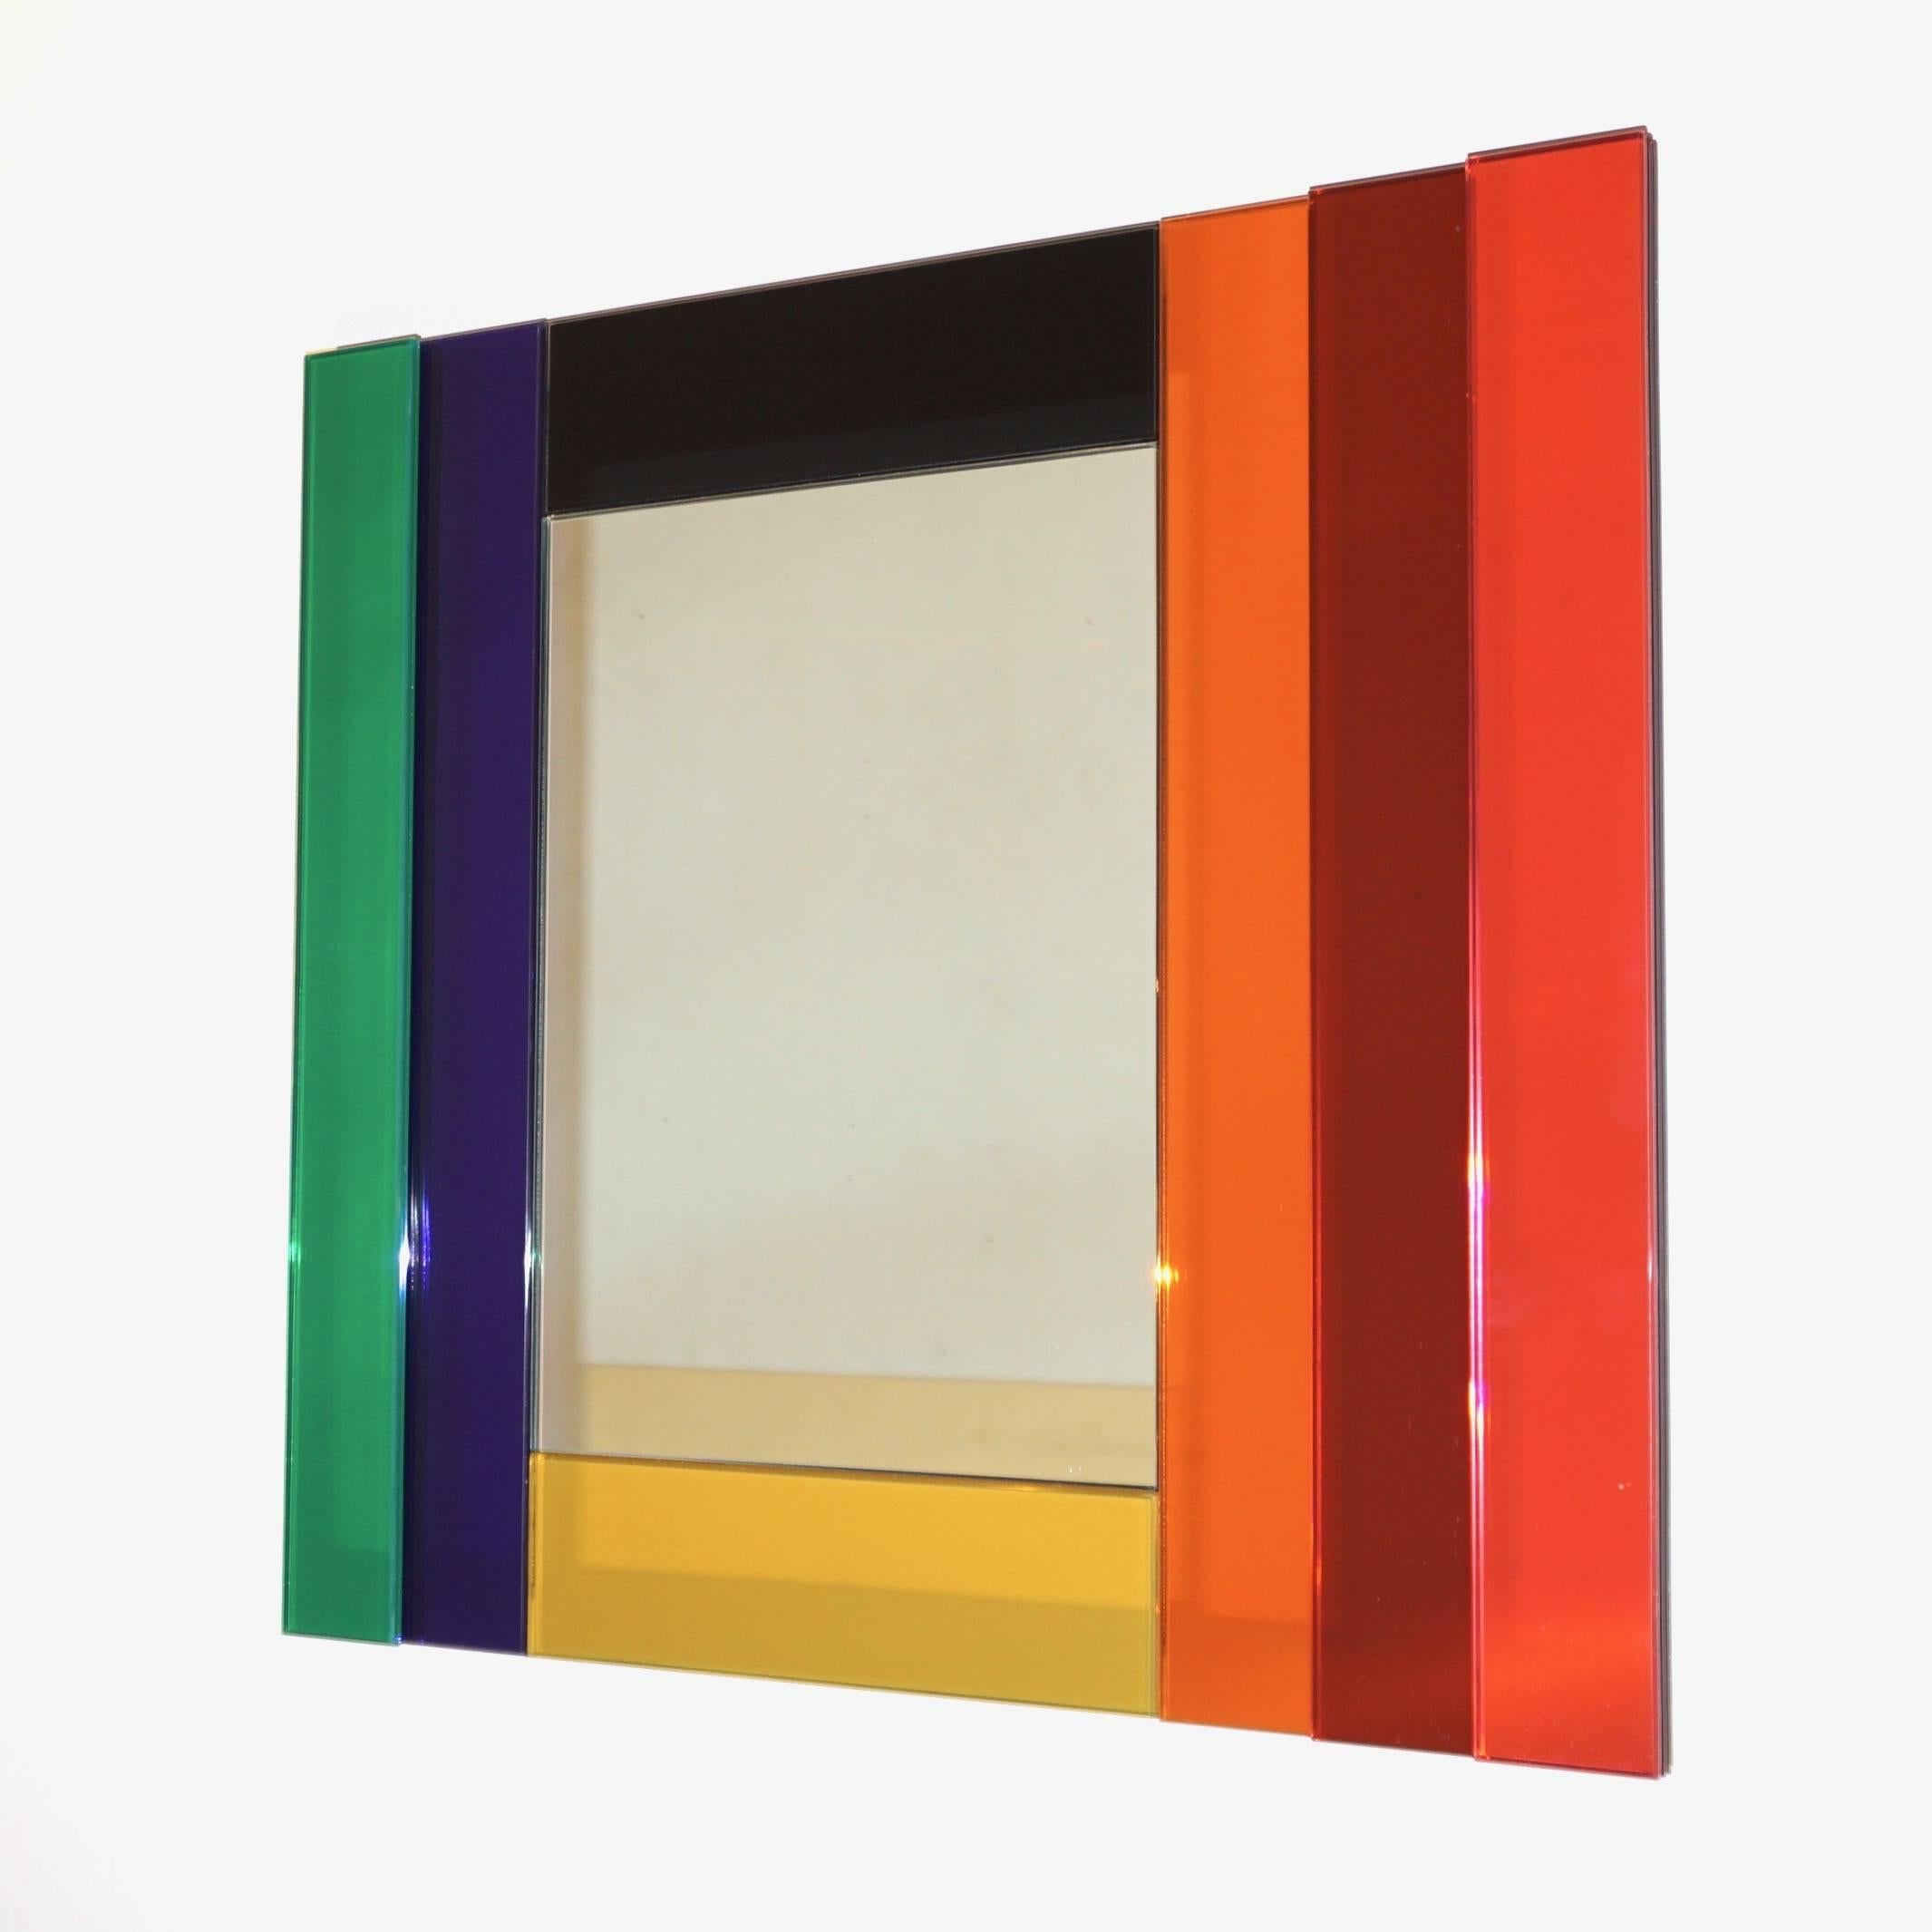 A modern Minimalist polychromatic rectangular mirror, circa 2008, from the collection Gli Specchi di Dioniso designed by Ettore Sottsass and produced by the Italian Company Glas Italia in Brianza. The mirrored plate is surrounded, to create drama in